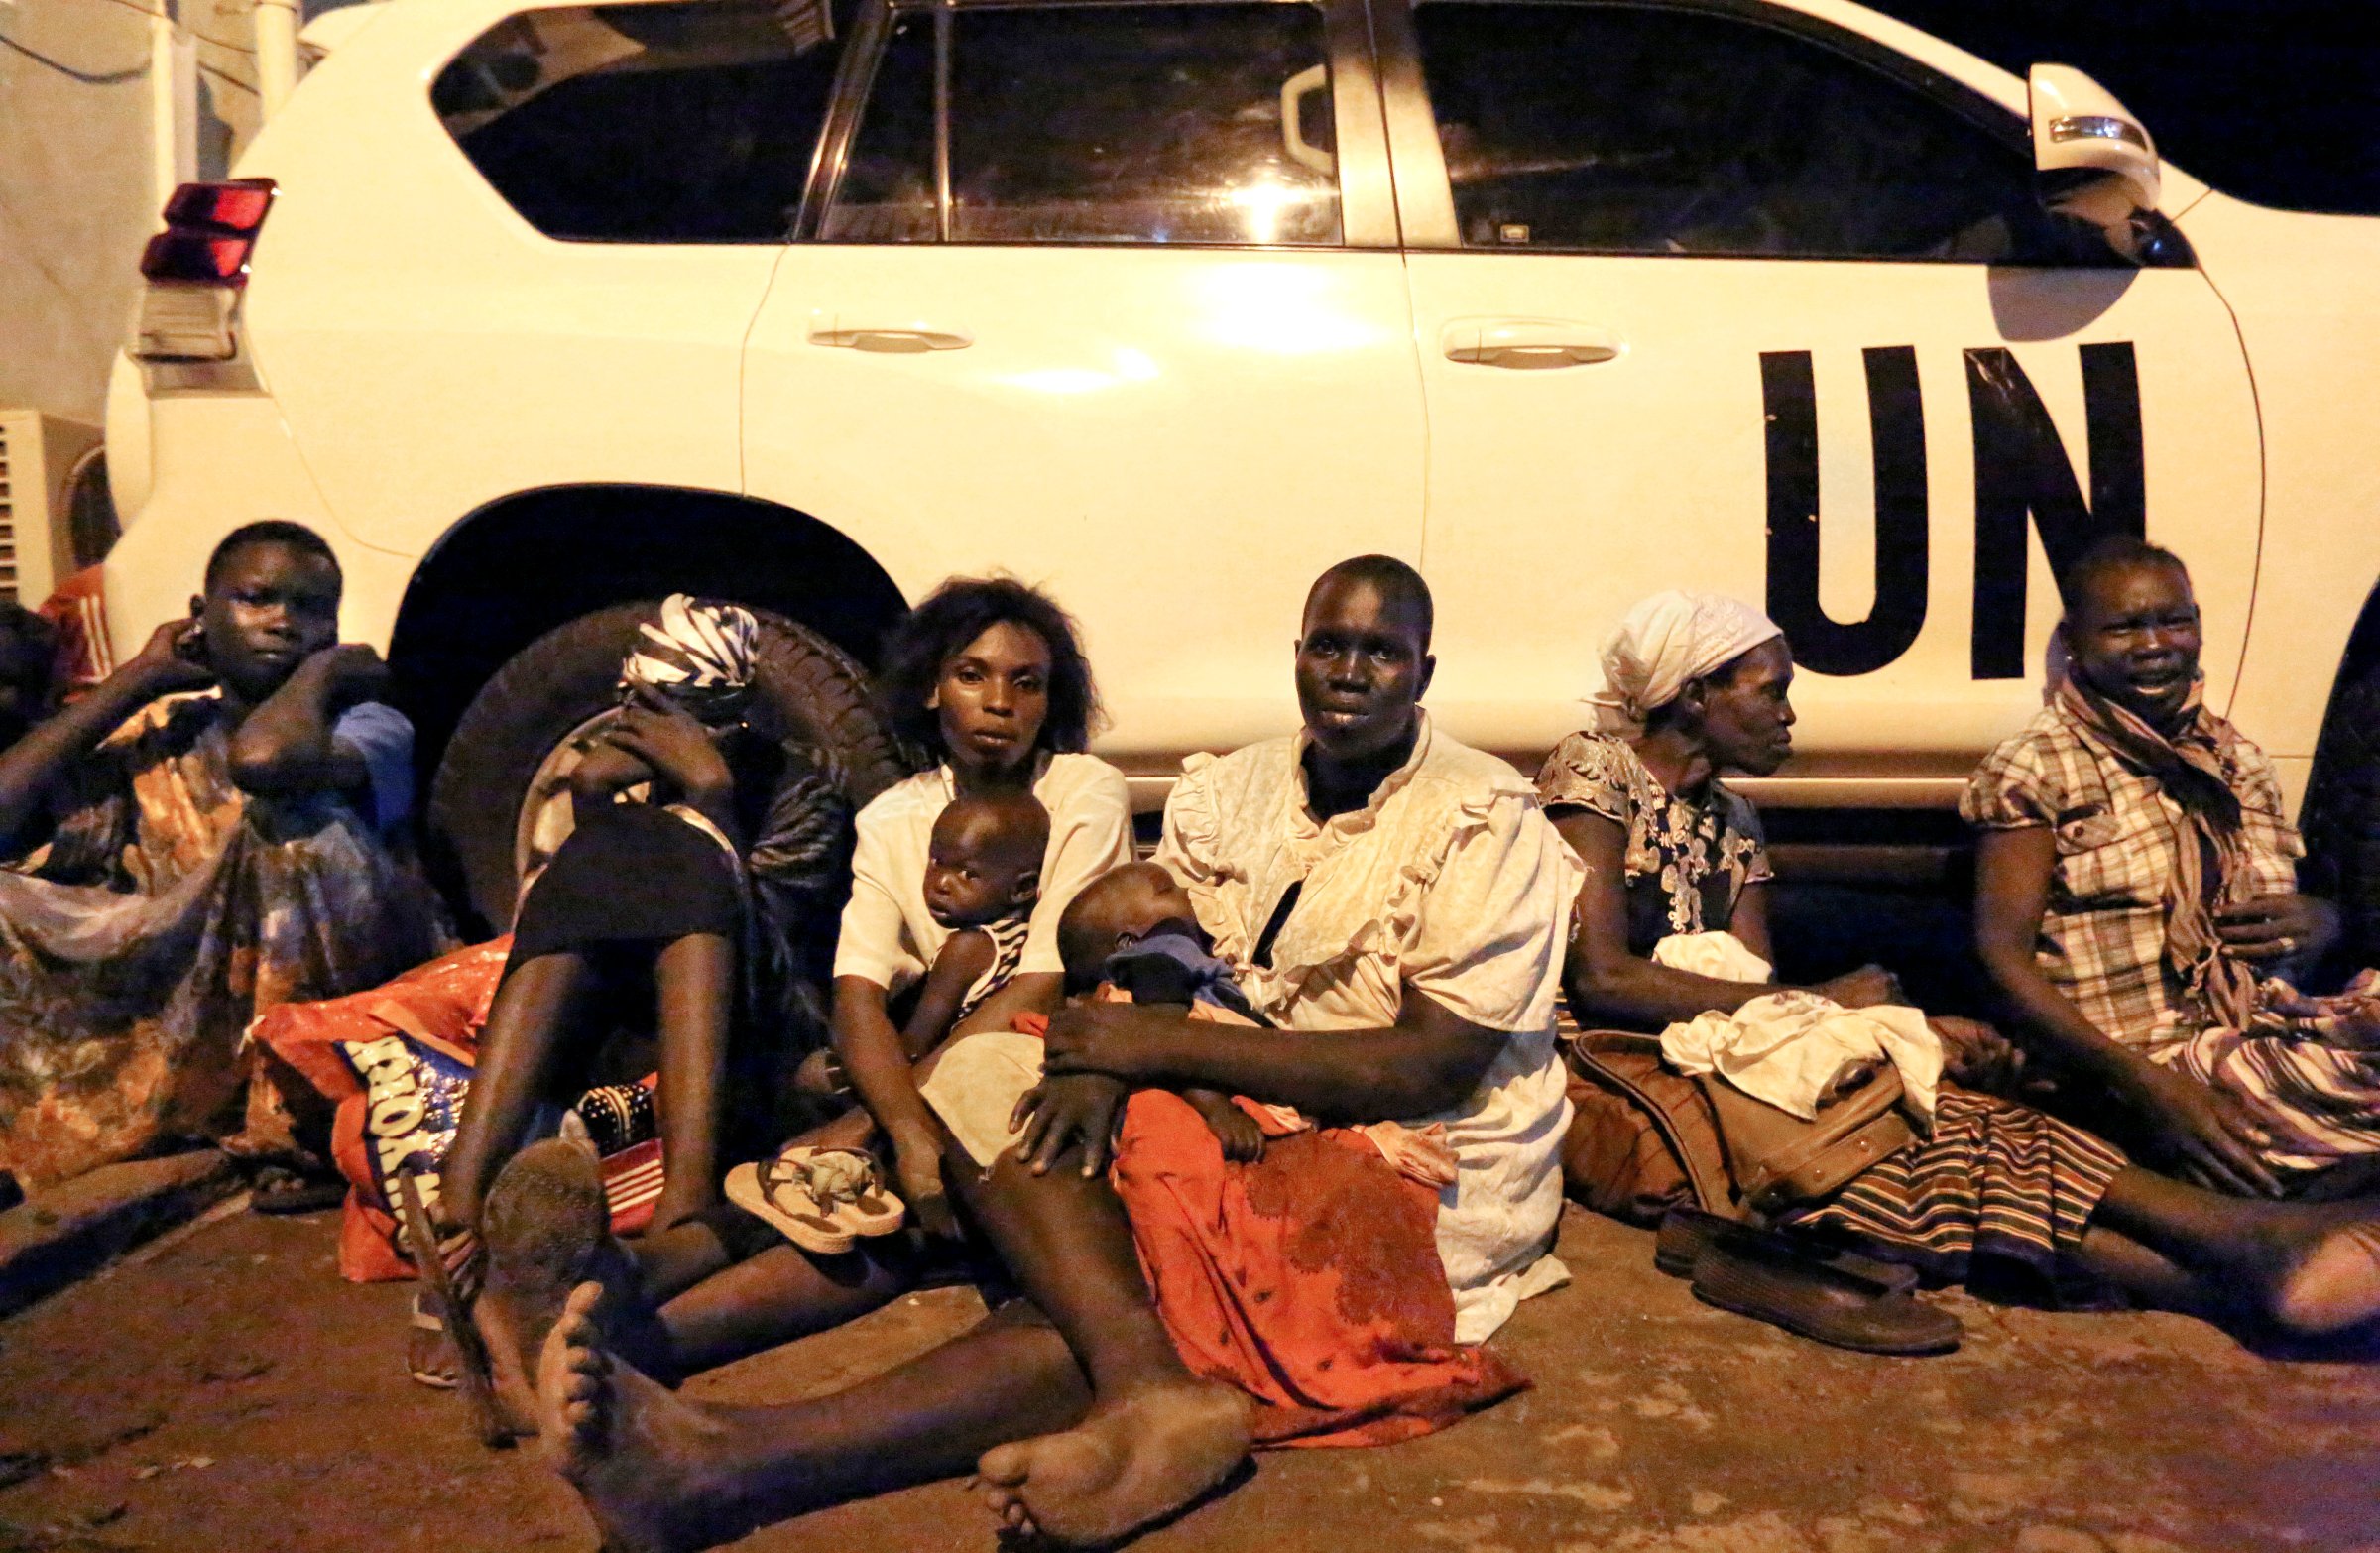 In this photo taken late Friday, July 8, 2016, and released by the United Nations Mission in South Sudan (UNMISS), women from neighboring villages rest against a U.N. vehicle as they take cover from the fighting between buildings on the perimeter of a U.N. compound in the capital, Juba.